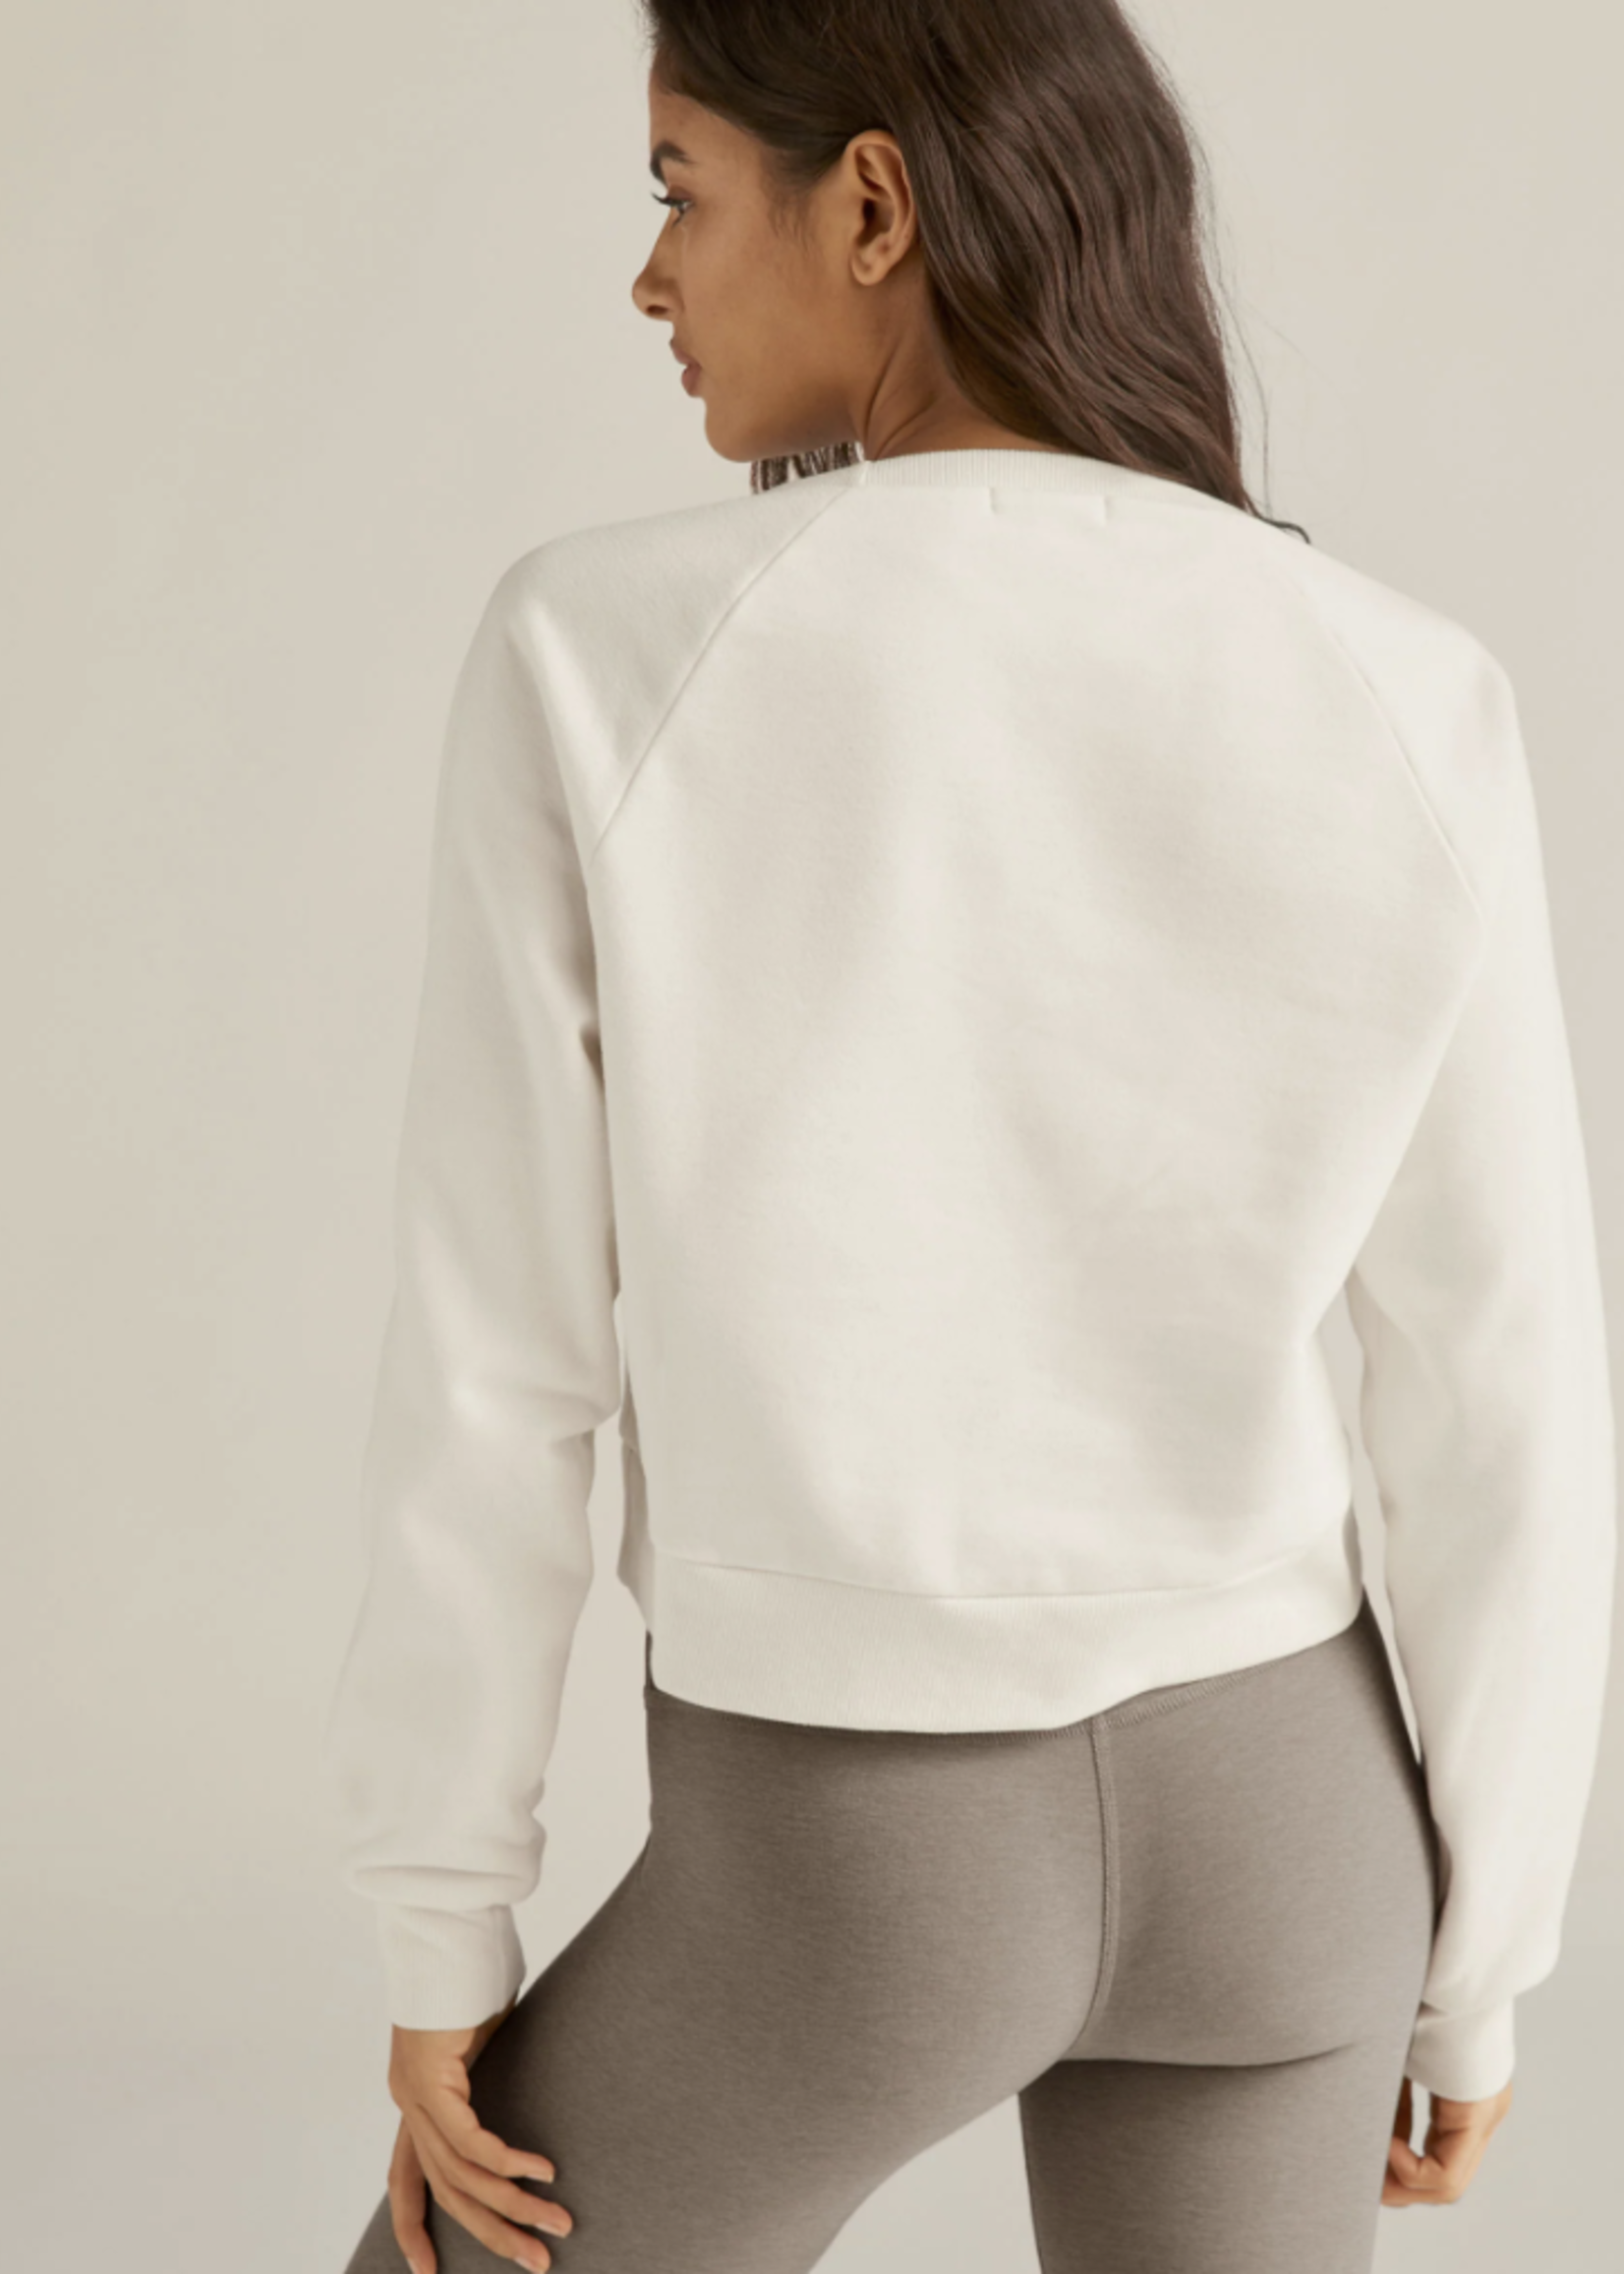 Beyond Yoga Uplift Cropped Pullover